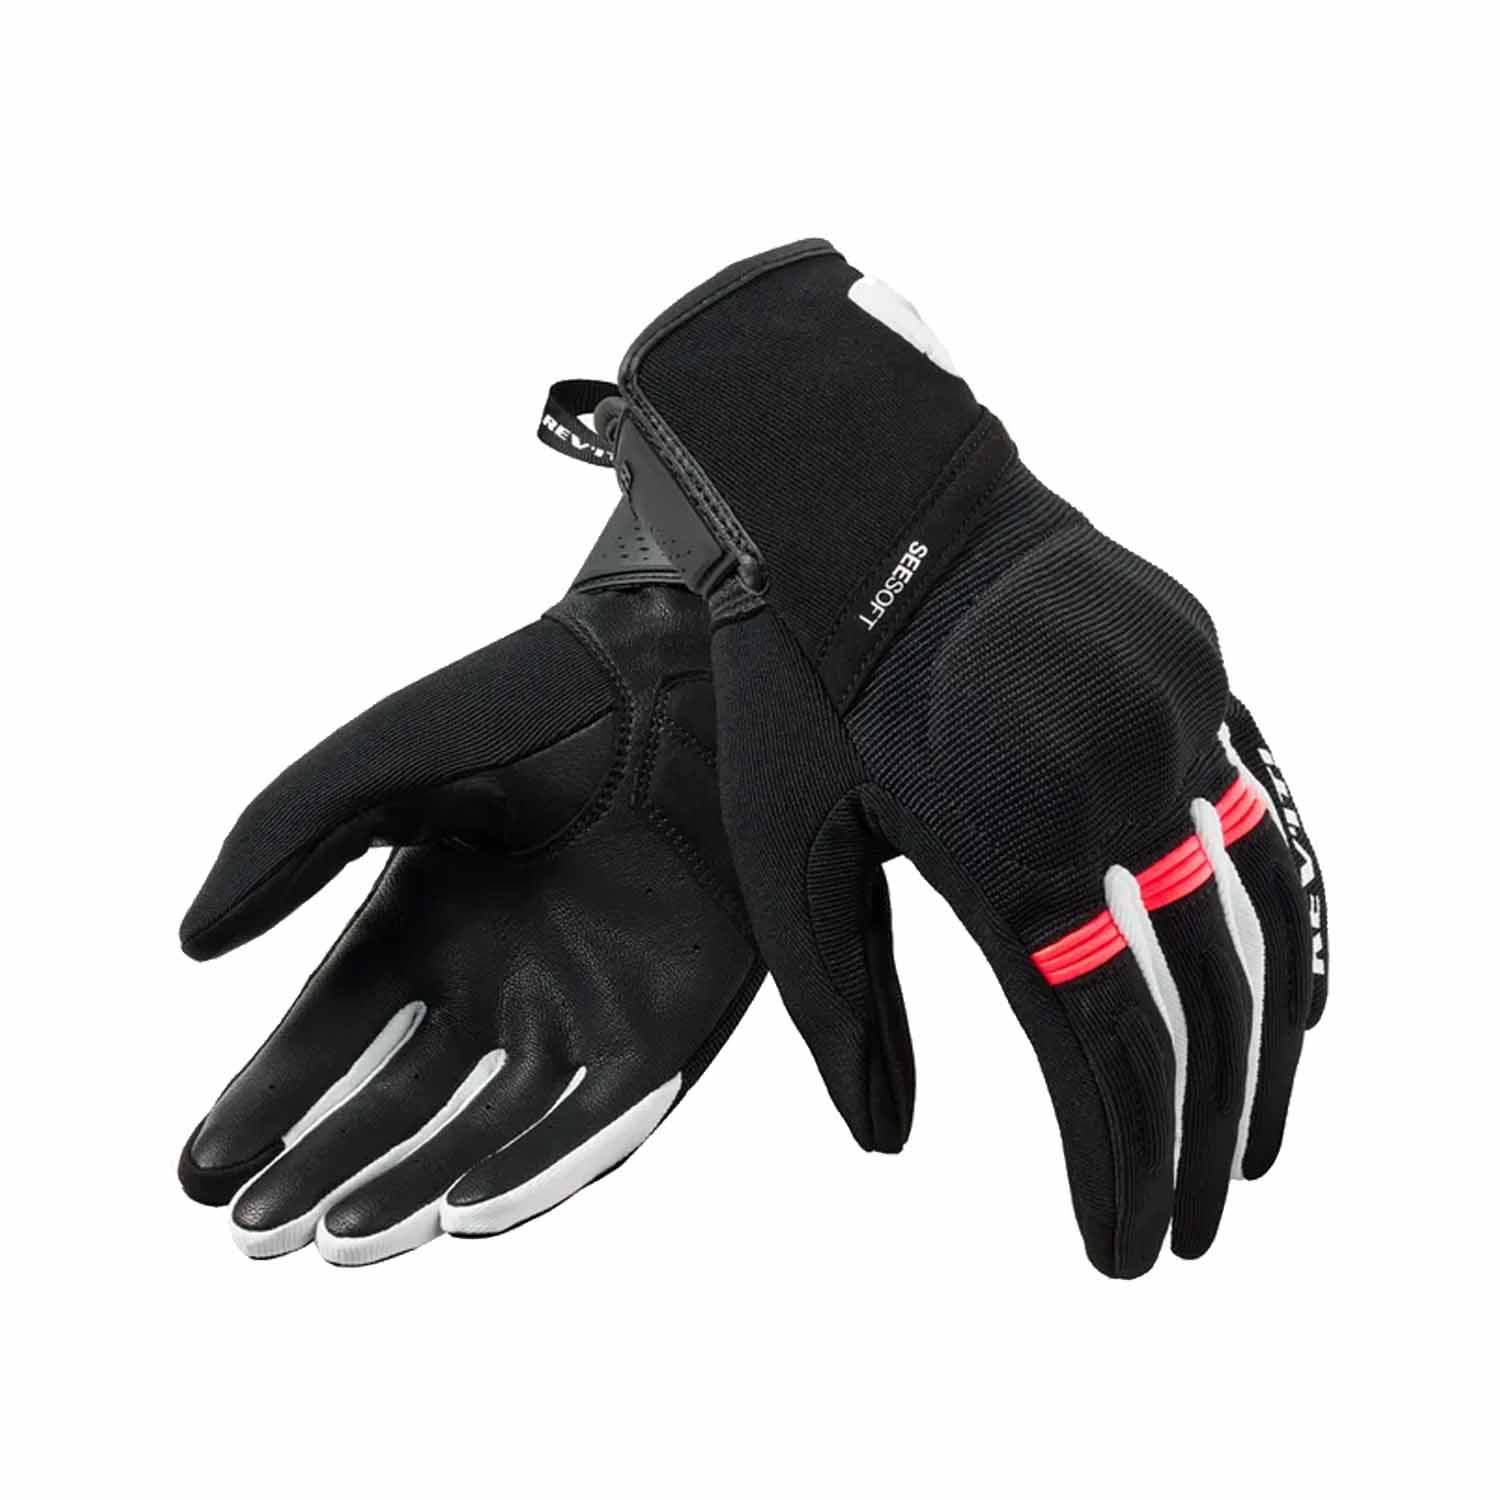 Image of EU REV'IT! Mosca 2 Ladies Gloves Black Pink Taille L